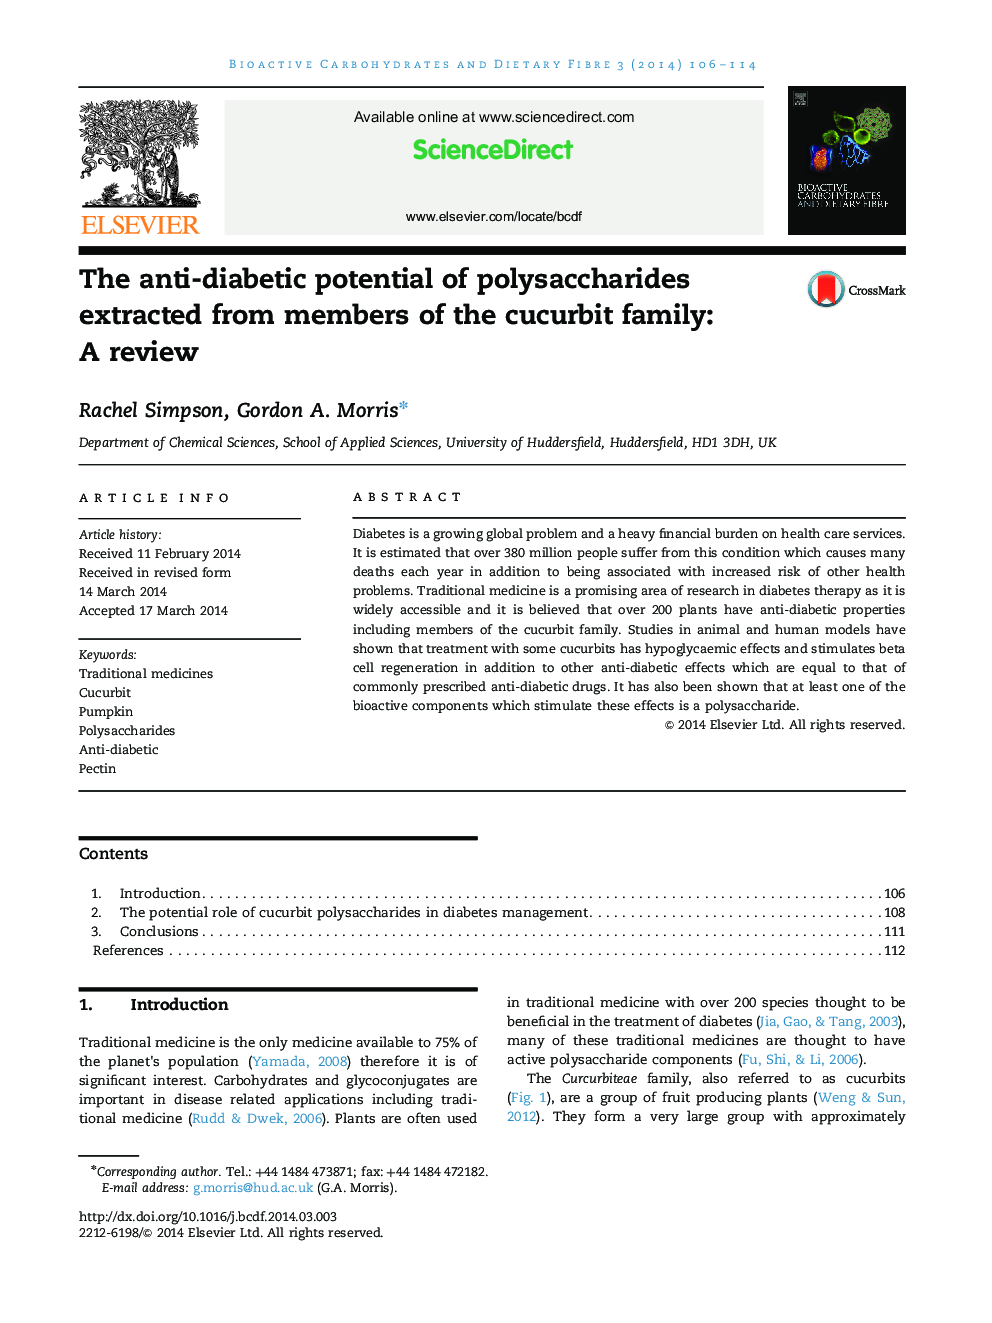 The anti-diabetic potential of polysaccharides extracted from members of the cucurbit family: A review